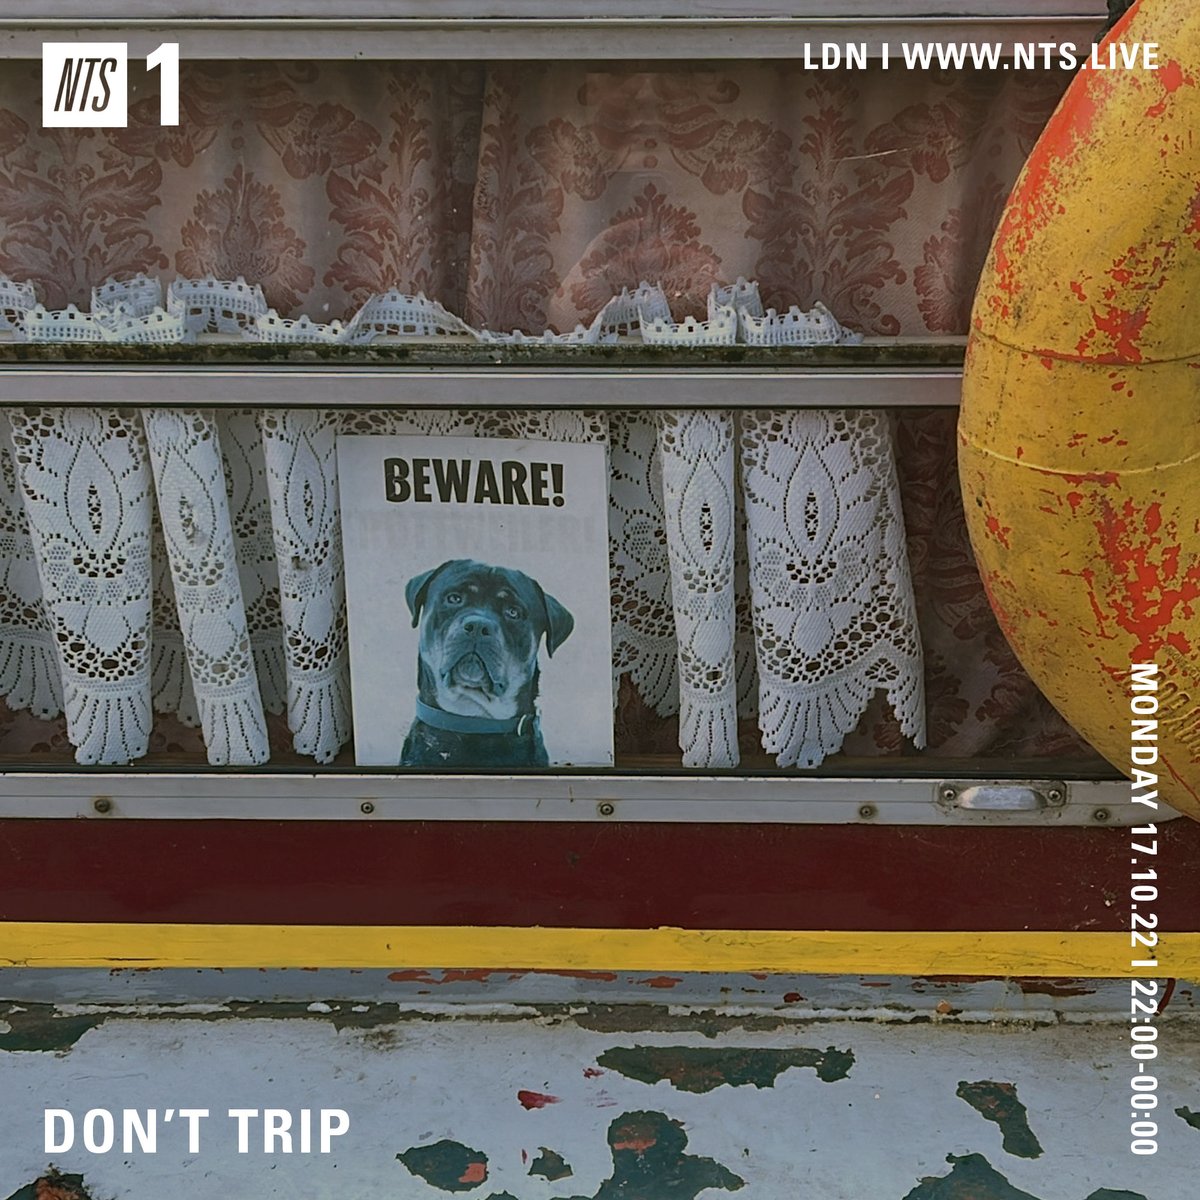 Don't Trip... @mirroredpalm delivers another show, with tracks from Lolina, Clair Rousay, Perila + more Listen: nts.live/1